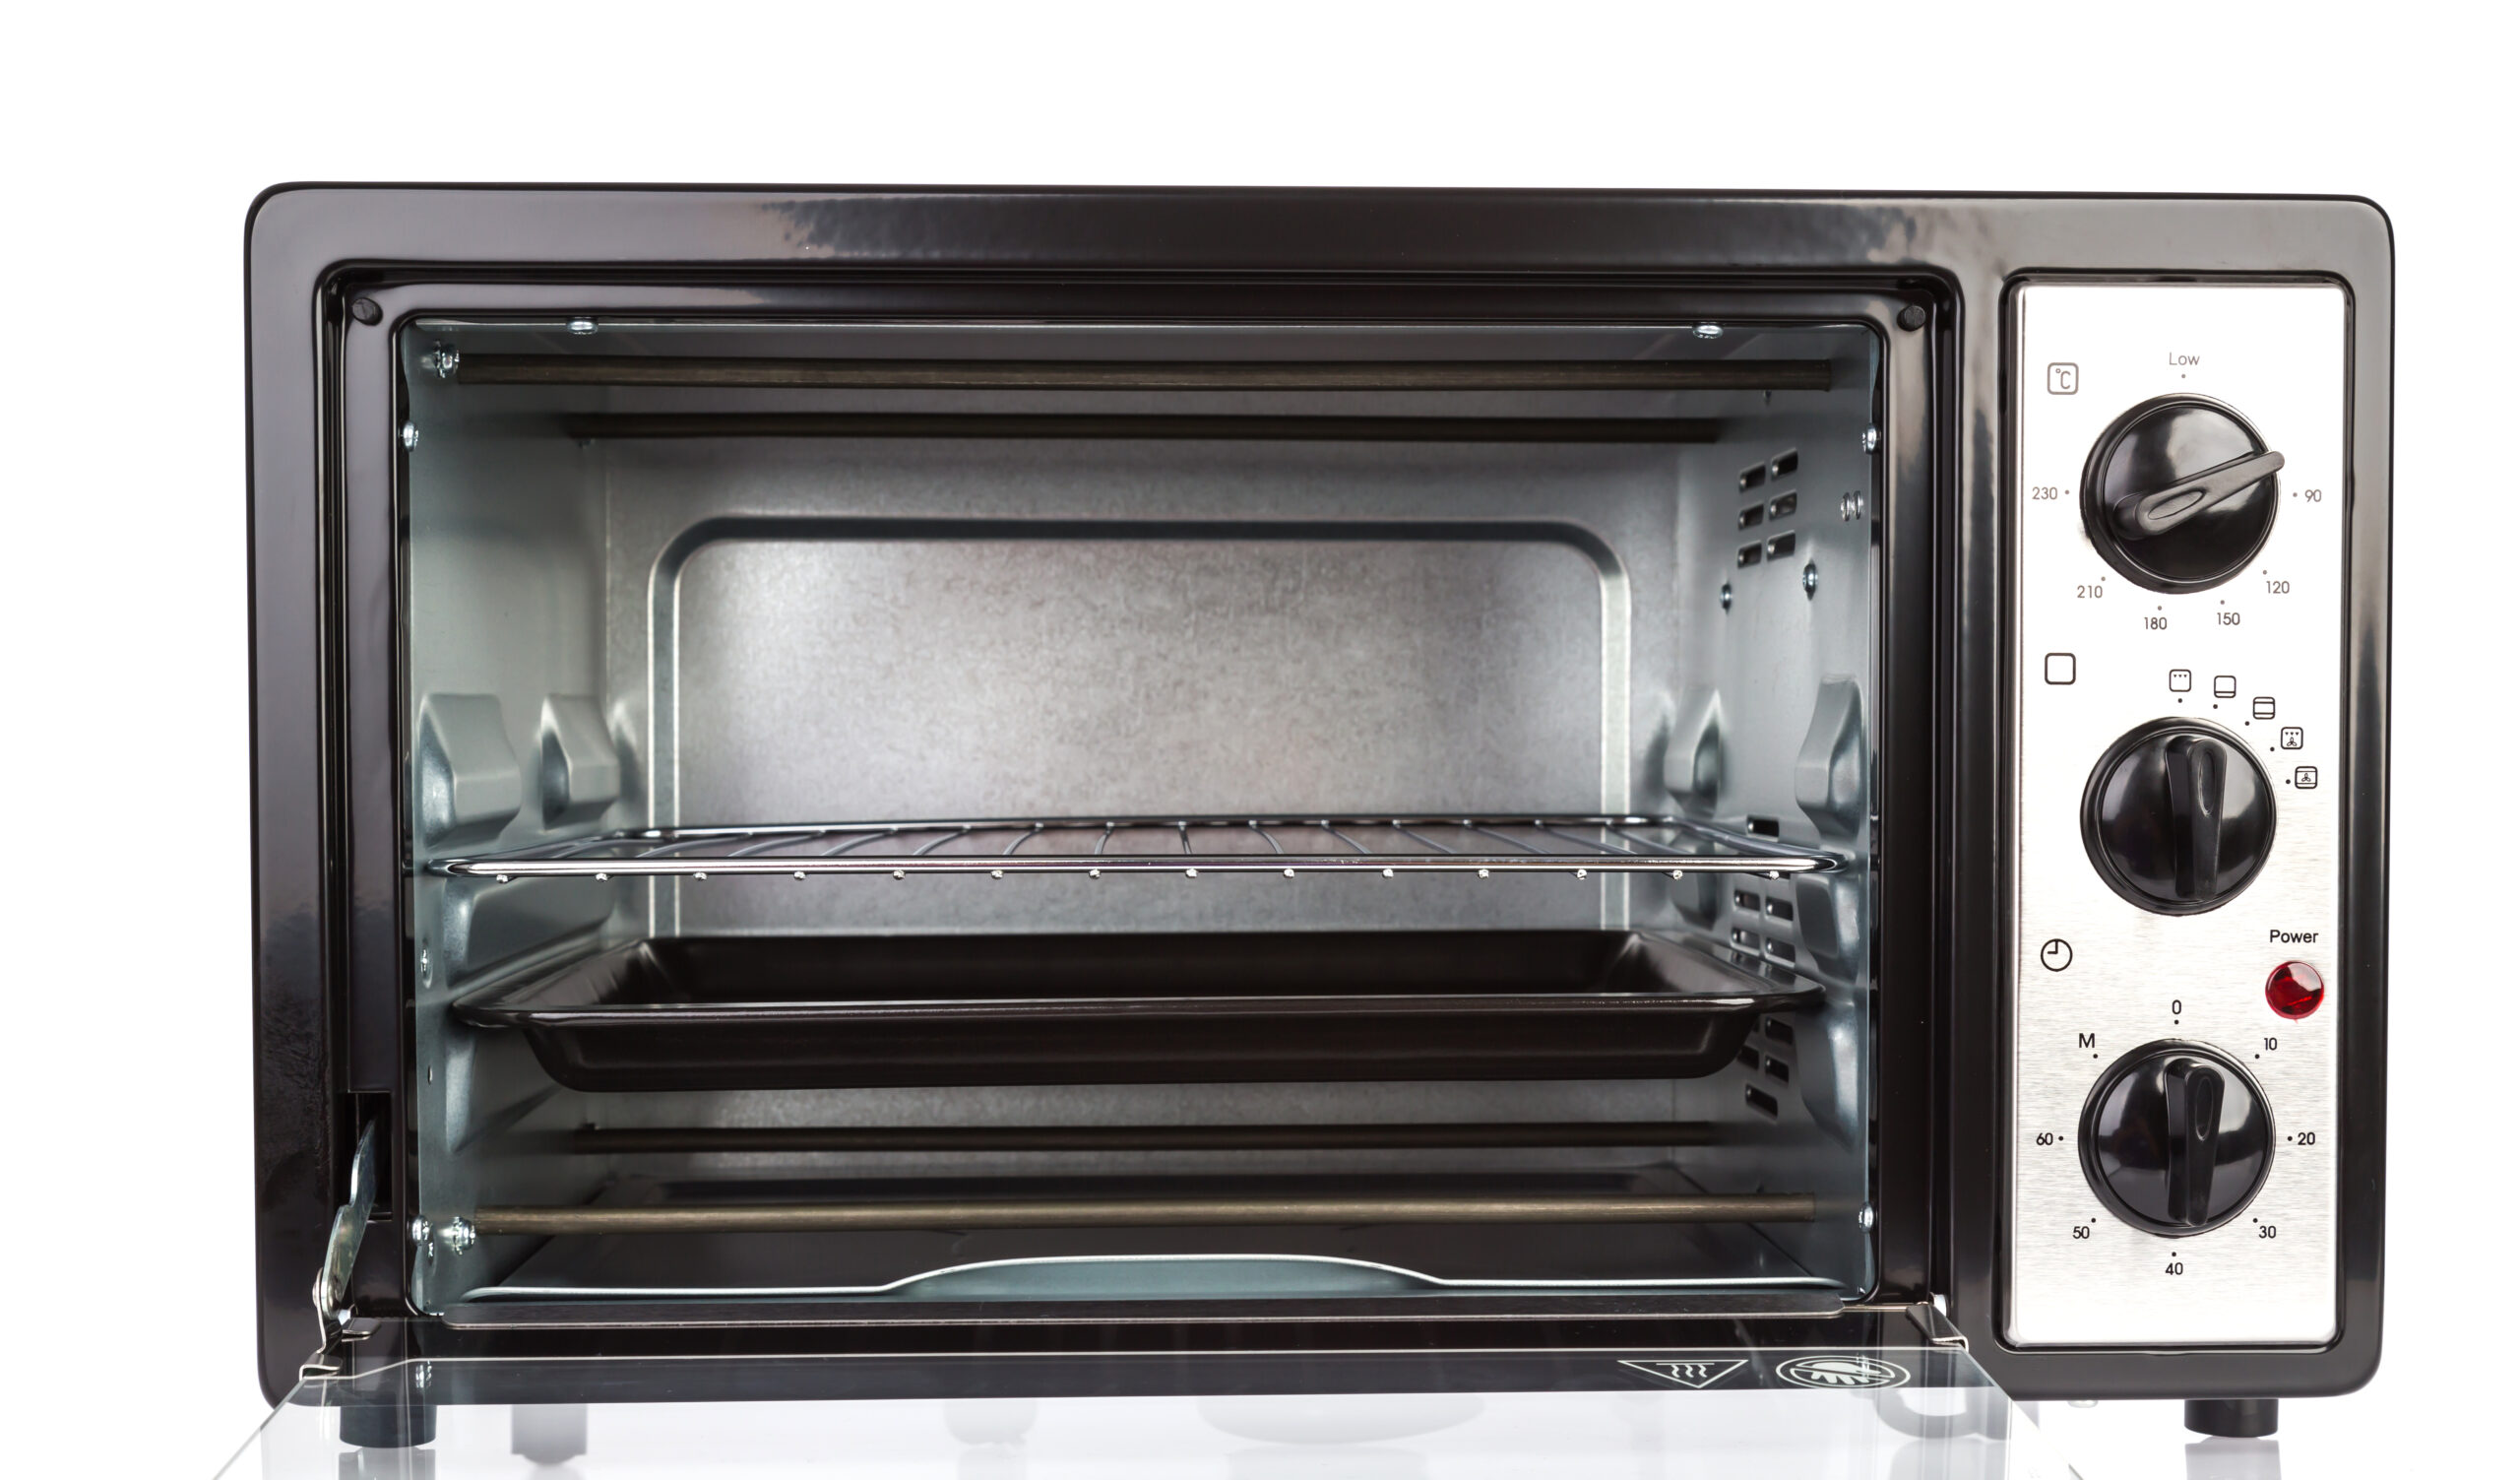 Front of an electric oven. At the top edge, there's a handle for opening the oven door. In the central part, there's a glass window through which you can see the rack. On the right side of the door, there are three control knobs: temperature, heating mode, timer. On the right edge, between two lower knobs, there's a 'Power' indicator light.